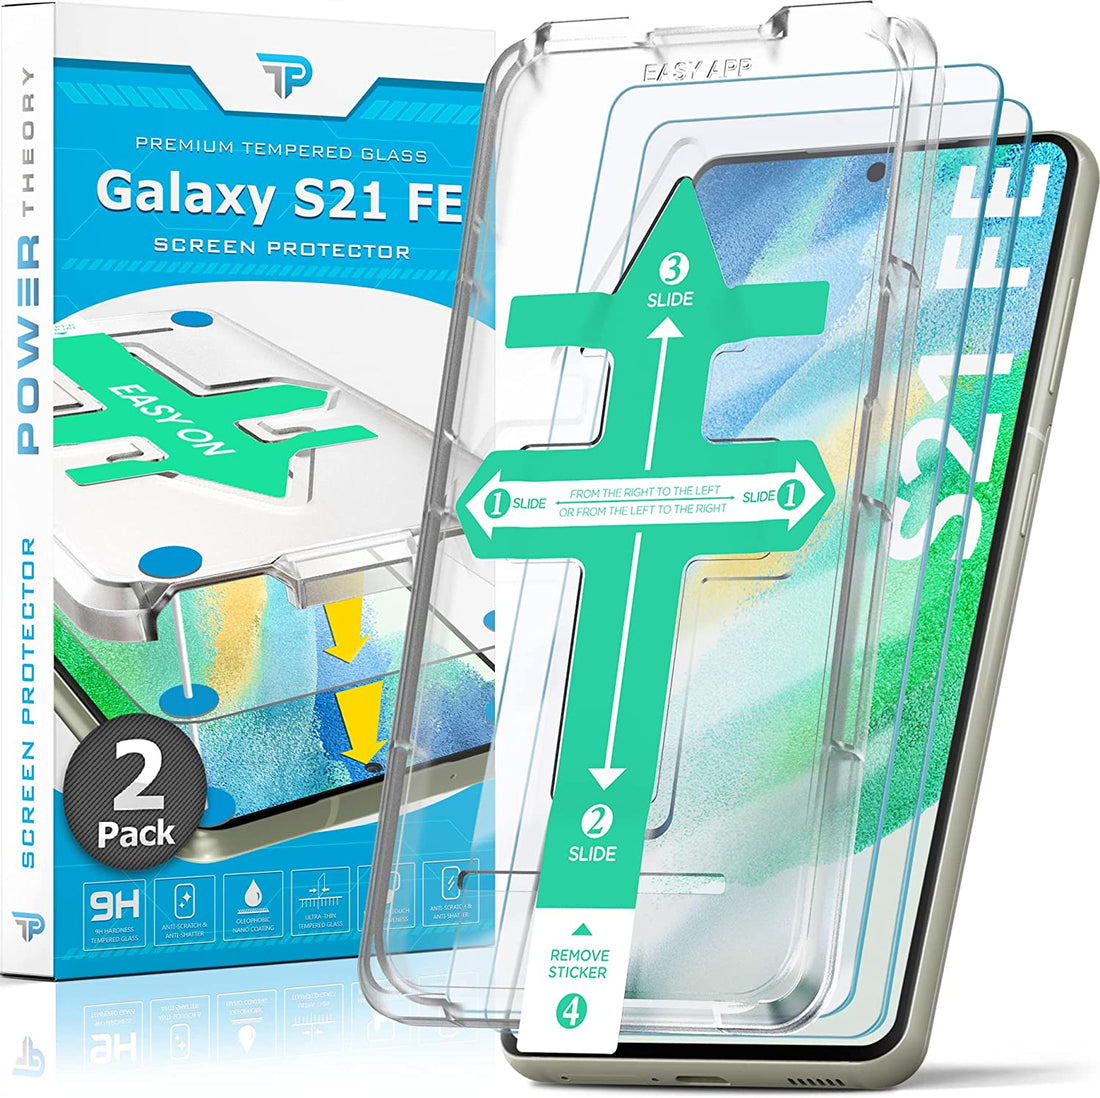 Samsung Galaxy S21 FE 5G Tempered Glass Screen Protector [2-Pack] Preview #1